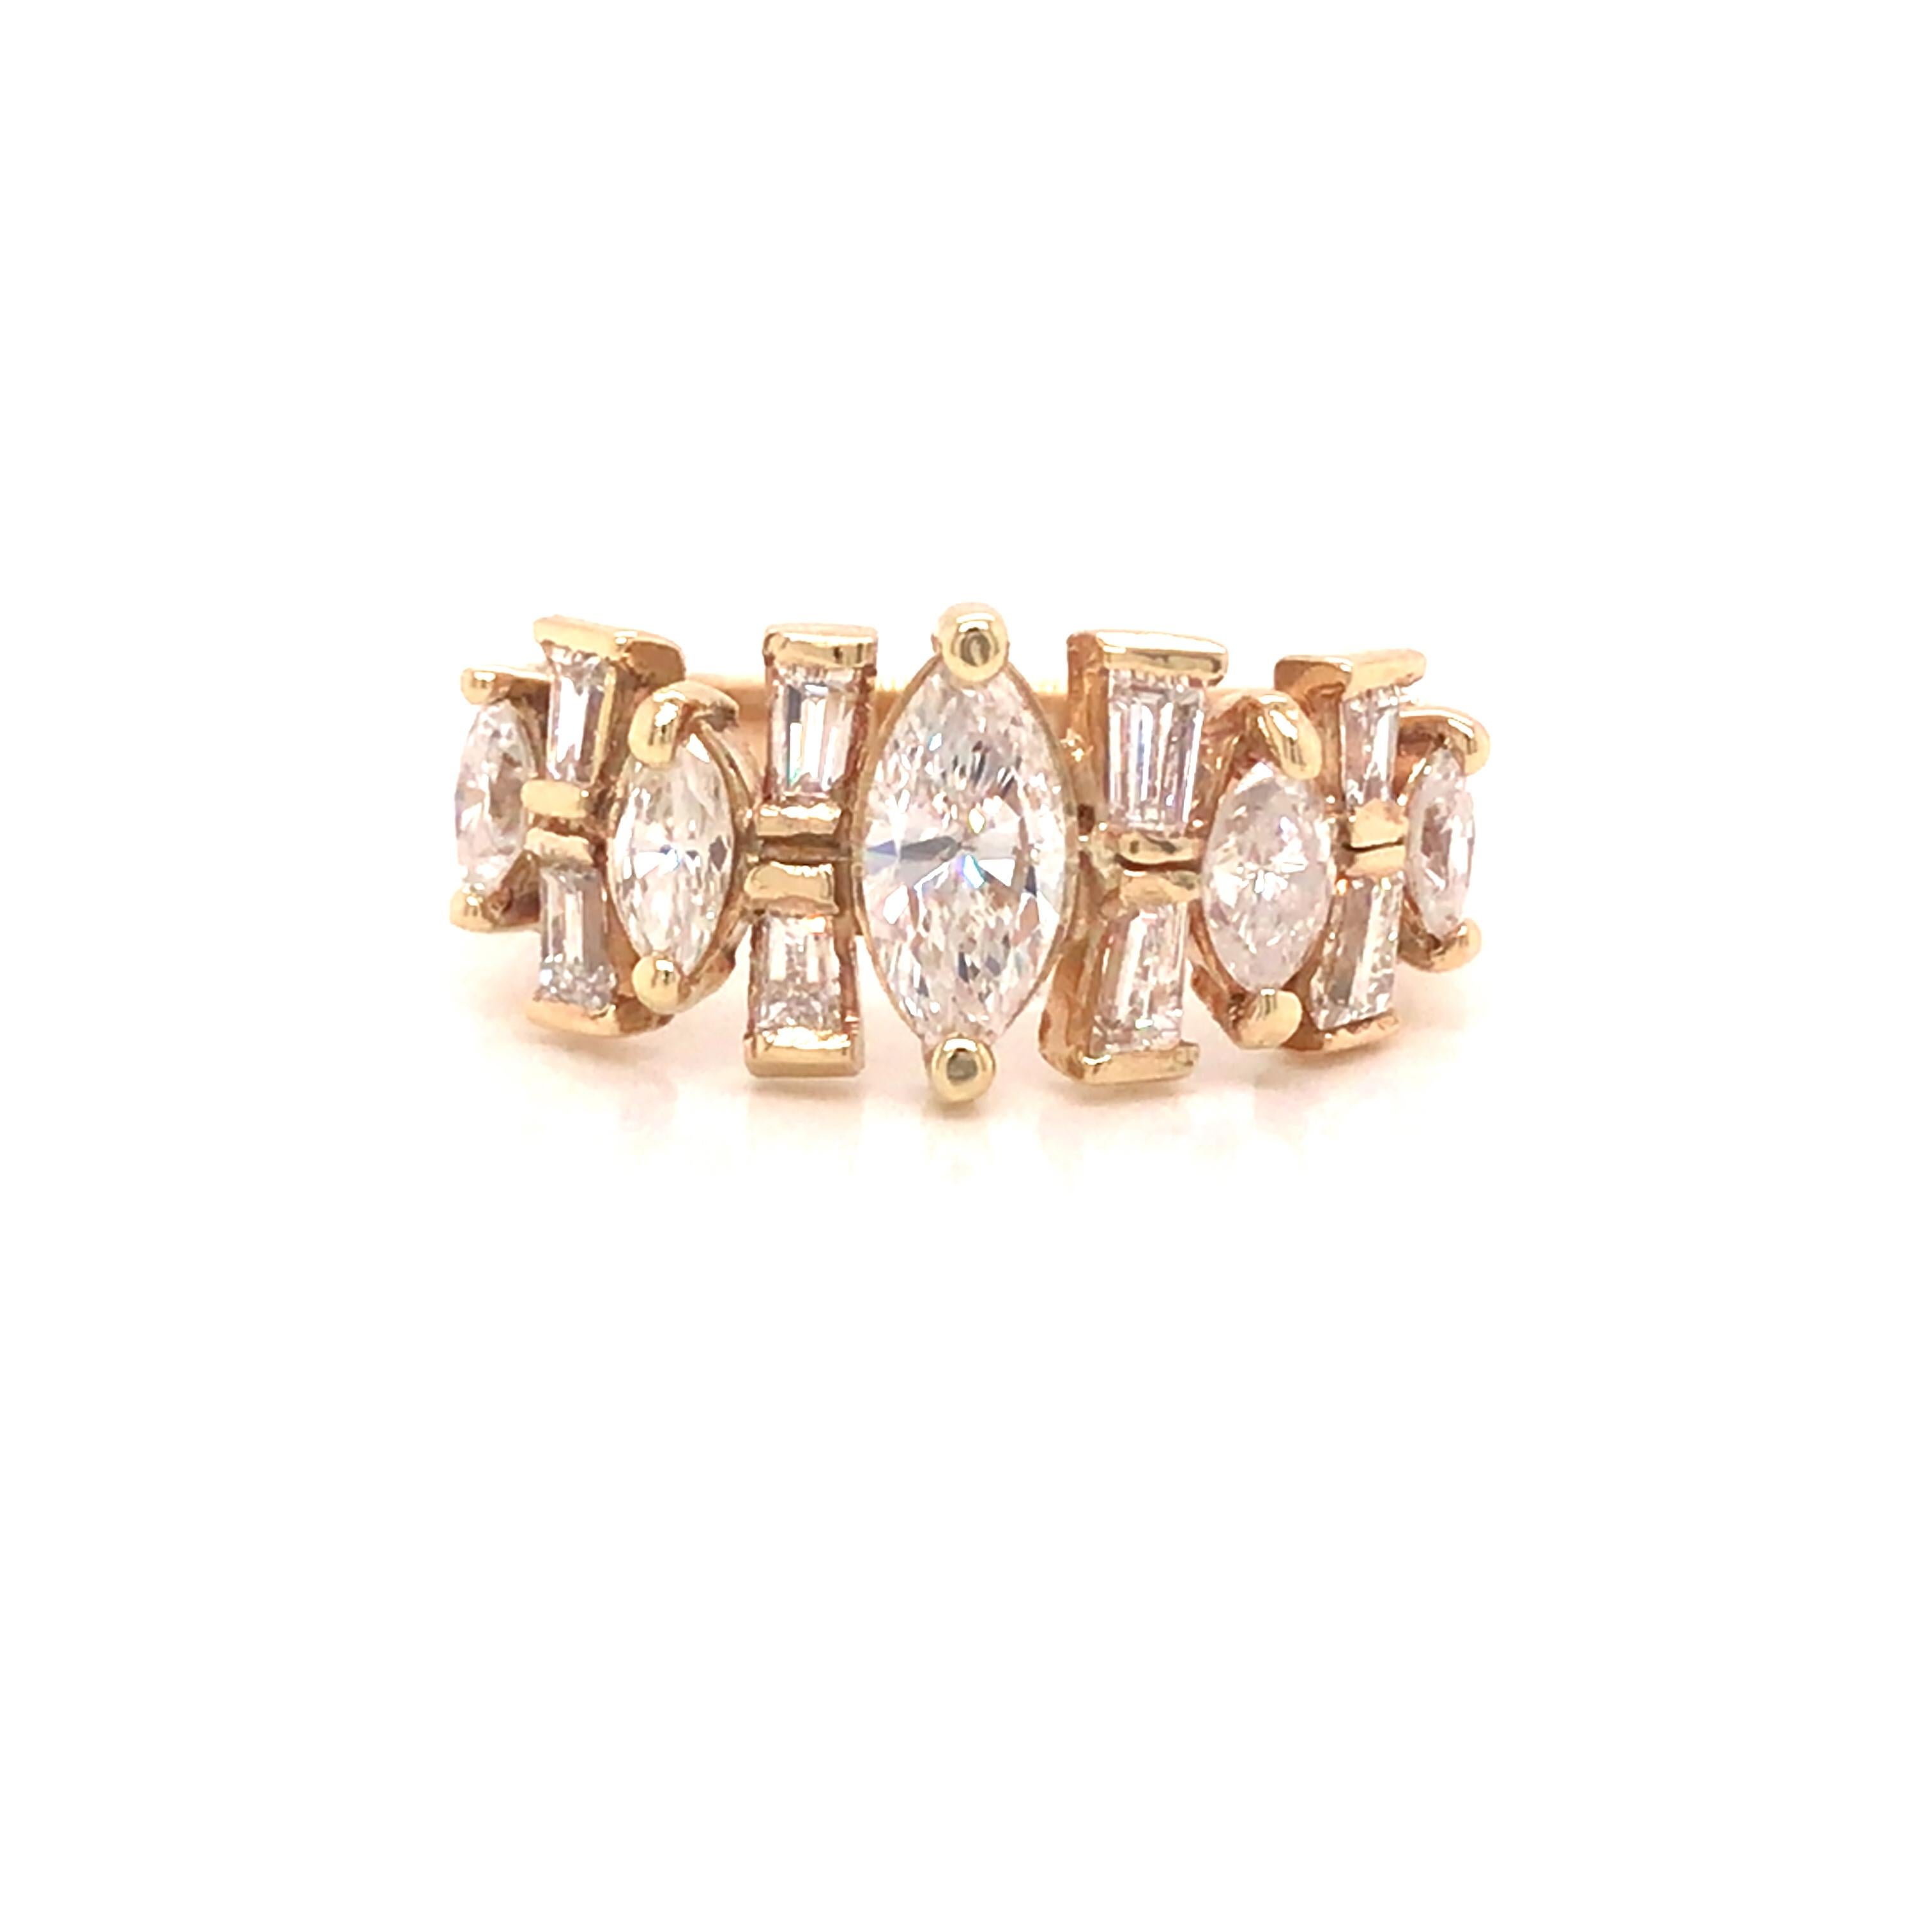 Marquise and Baguette Diamond Band in 14K Yellow Gold.  (5) Marquise and (8) Baguette Diamonds weighing 1.28 carat total weight, F-G in color and VS-SI in clarity are expertly set.  The Band measures 3/8 inch in width.  Ring size 6.  4.97 grams.